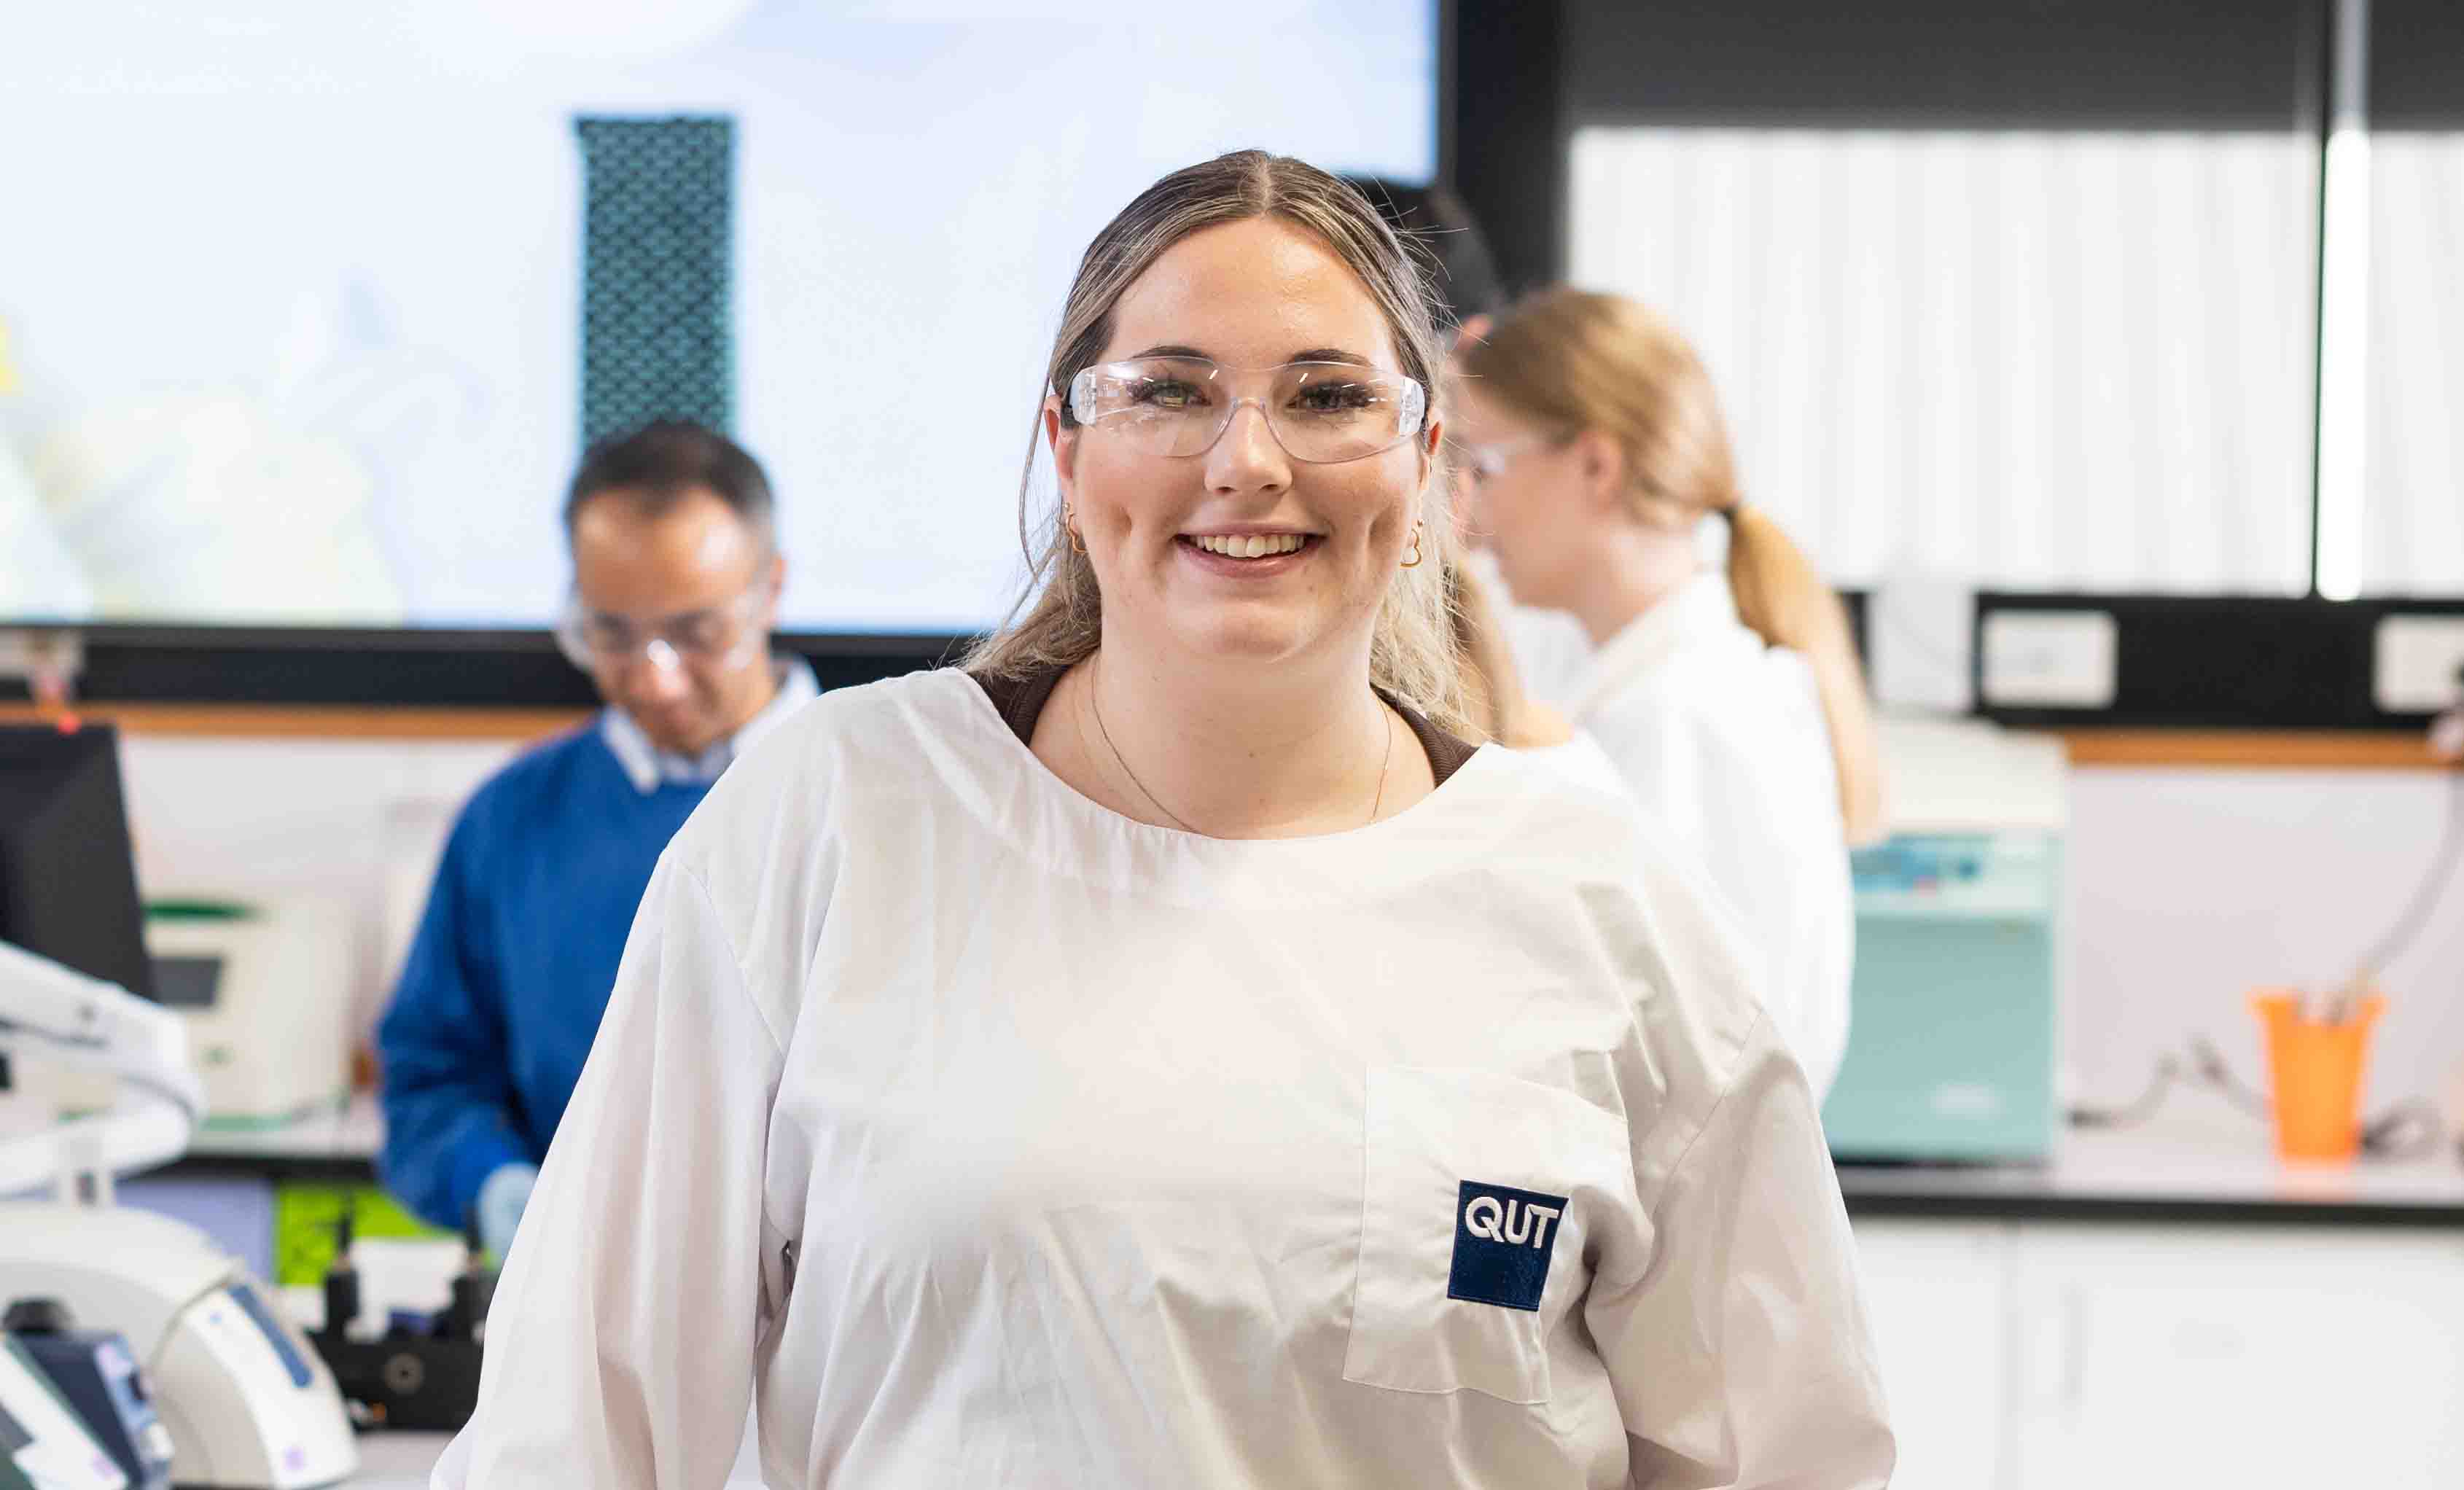 A smiling, blonde, female pharmacy student wearing a lab coat and glasses stands in a laboratory.